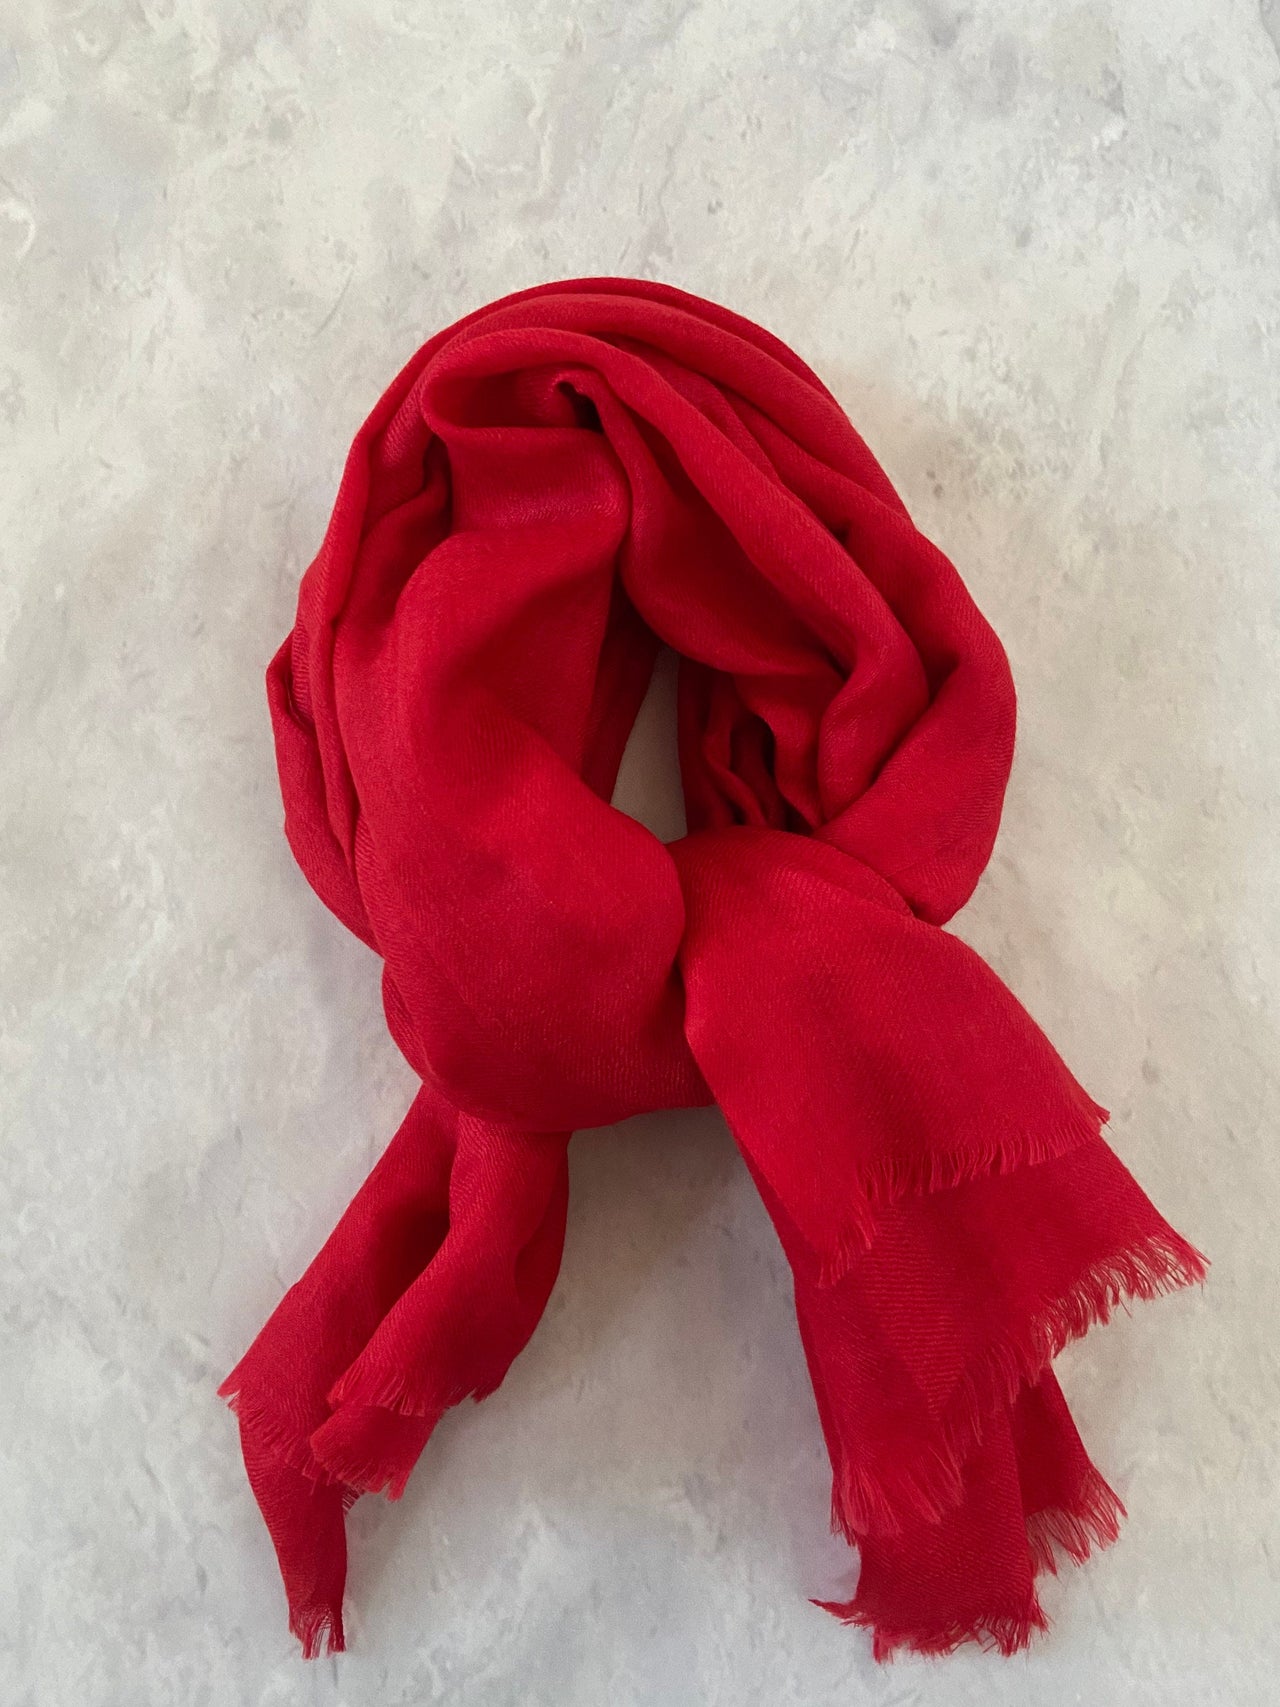 100% Cashmere/Pashmina Scarf/Shawl/Wrap from Kashmir, India | Handwoven | Red | Ships from California